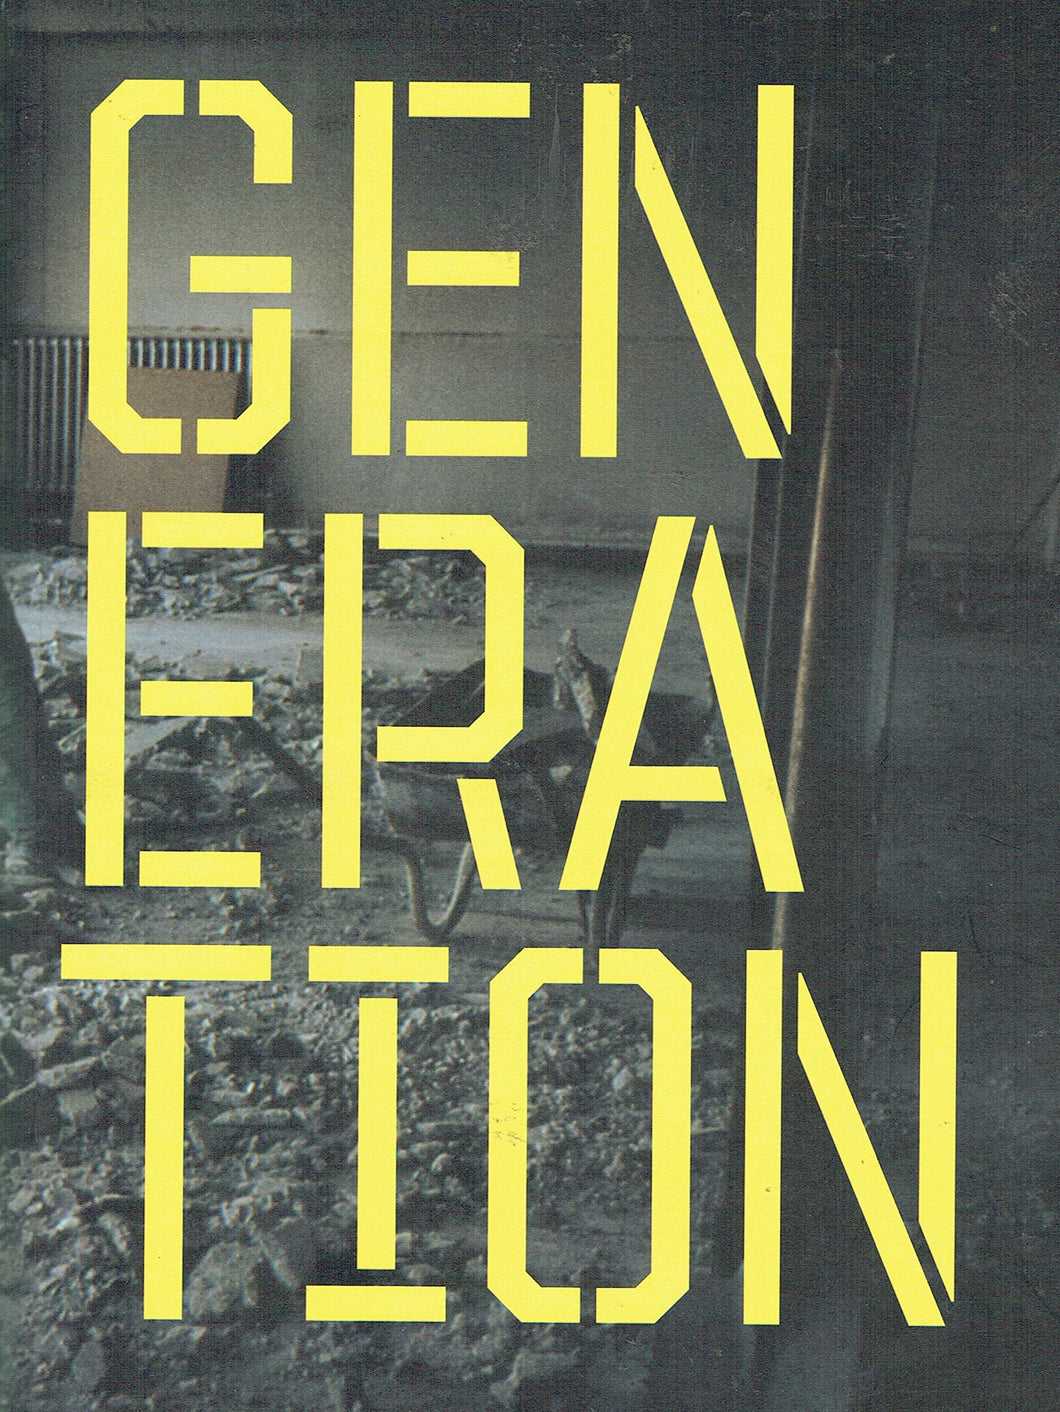 Generation: 30 Years of Creativity at Temple Bar Gallery and Studios, 1983-2013